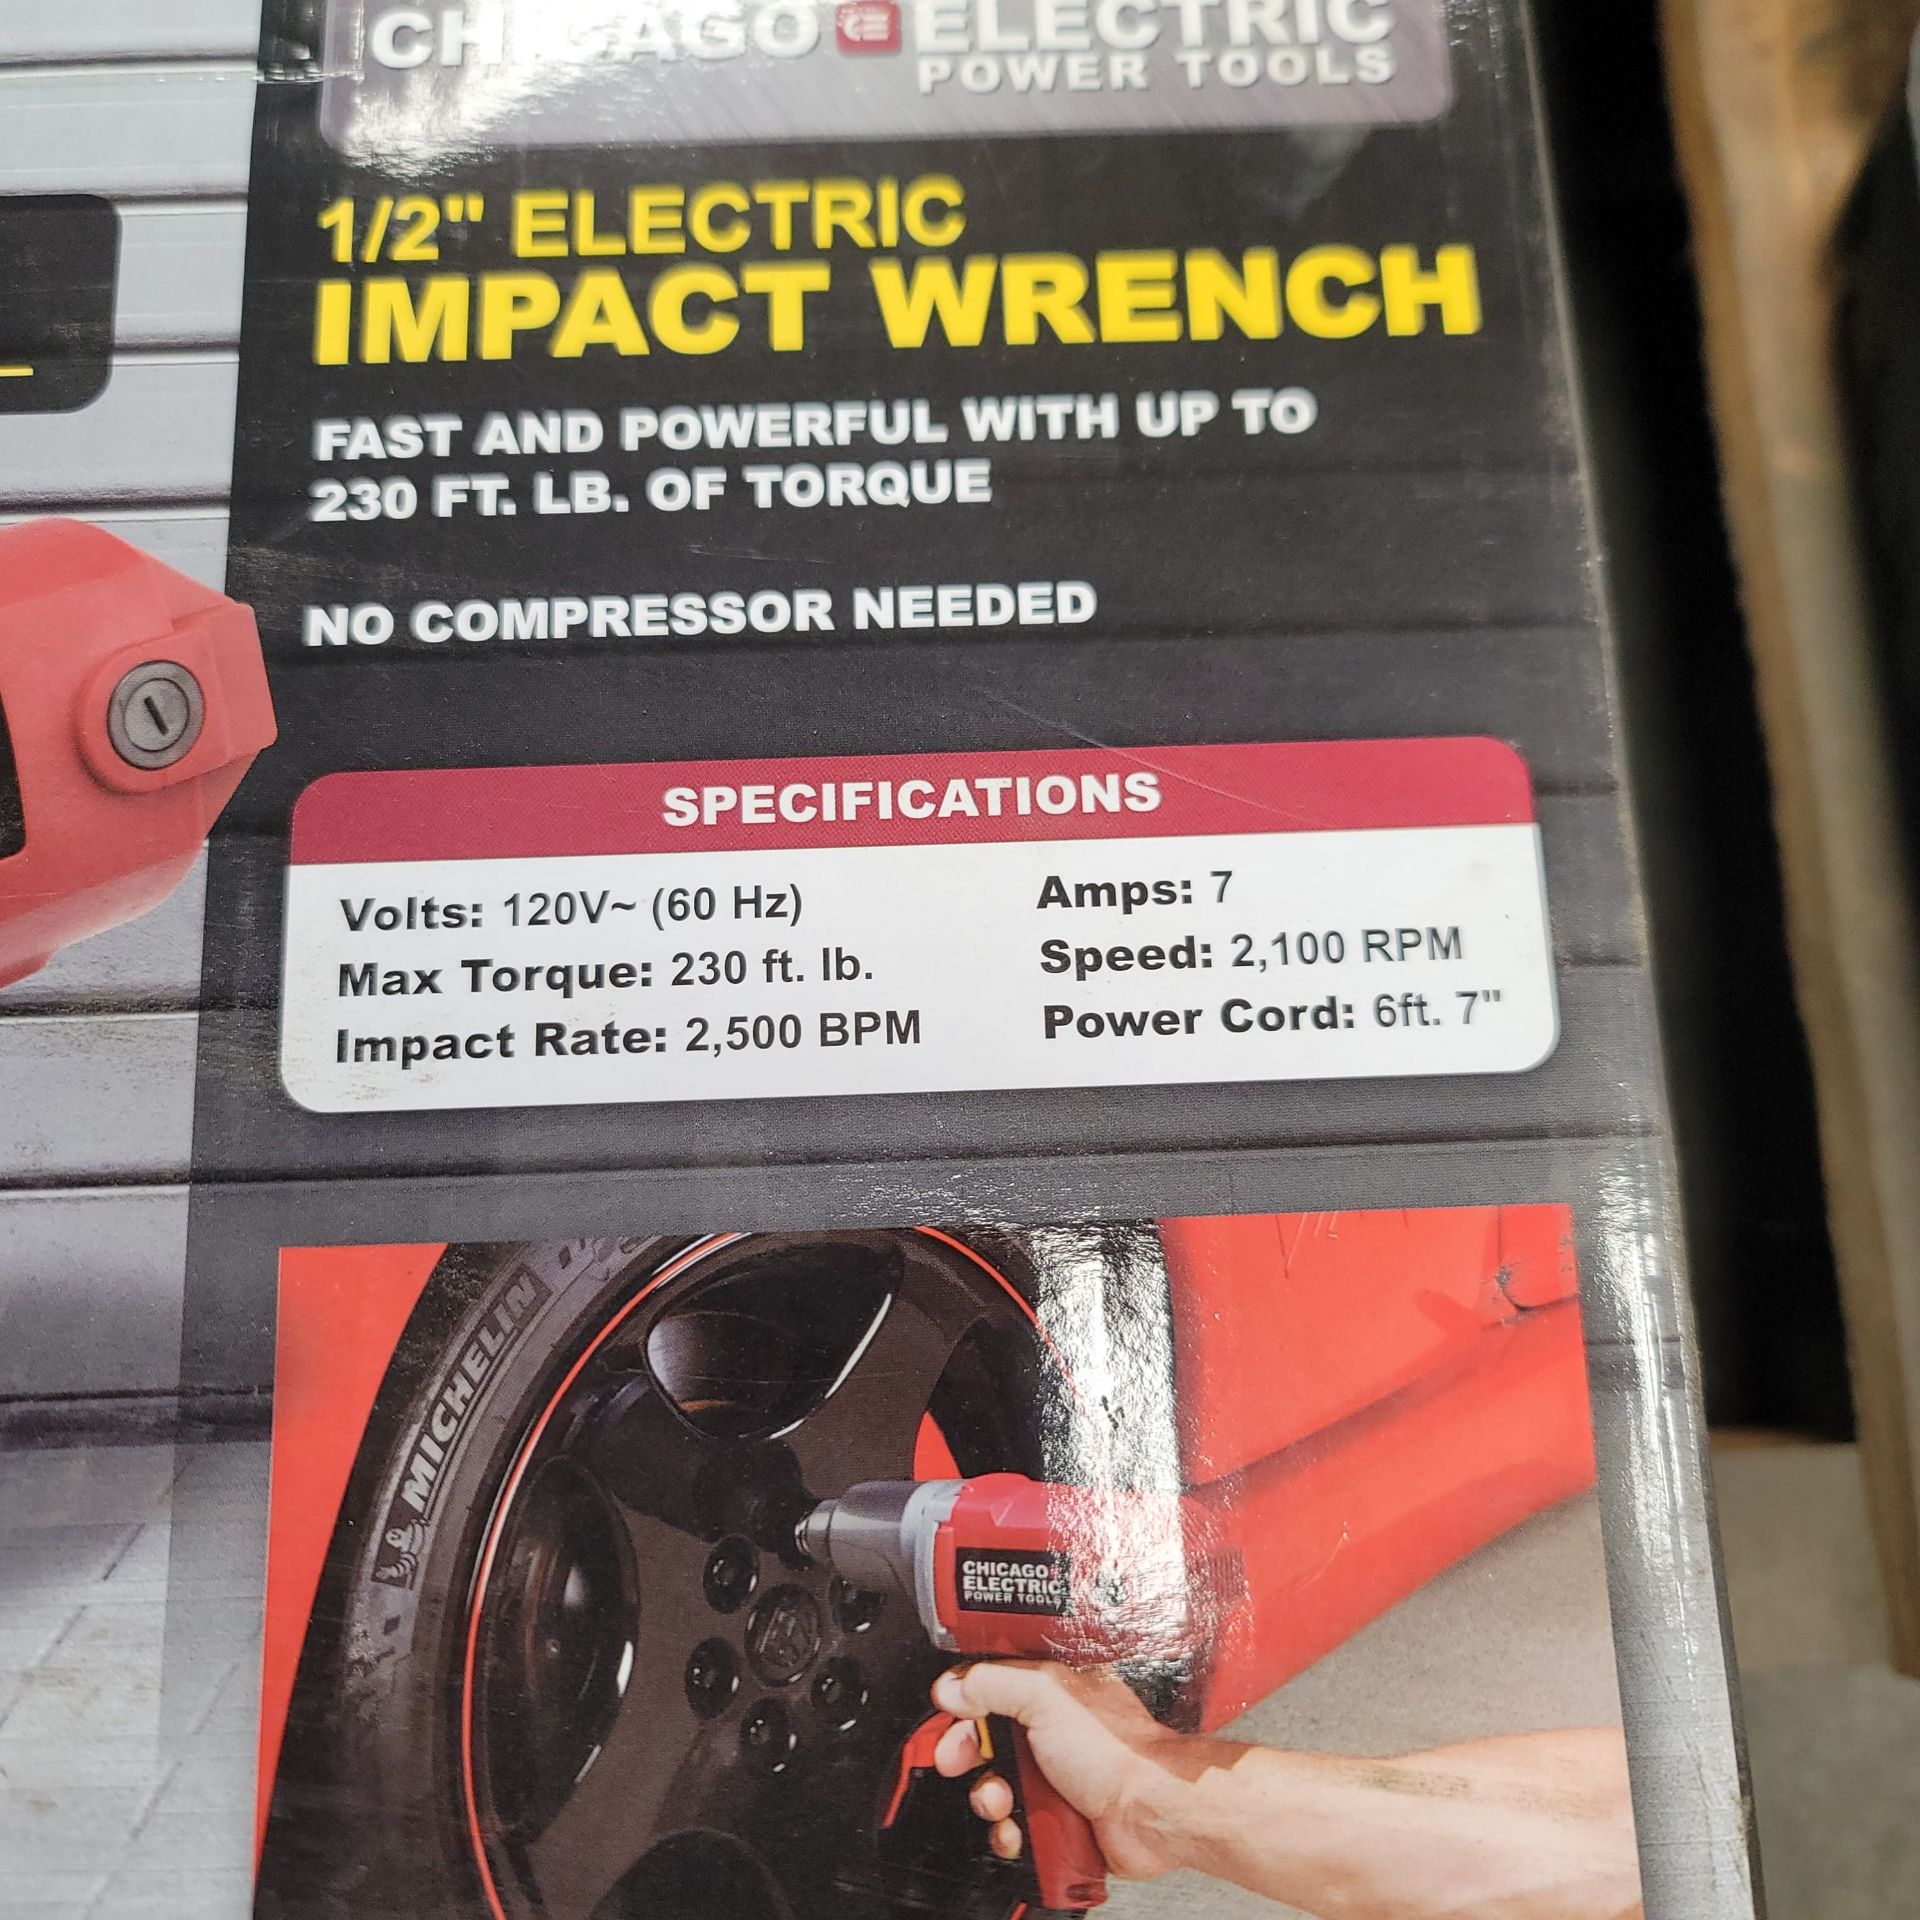 CHICAGO ELECTRIC 1/2" ELECTRIC IMPACT WRENCH, ITEM NO. 68099, UP TO 230 FT LB, NEW - Image 2 of 2